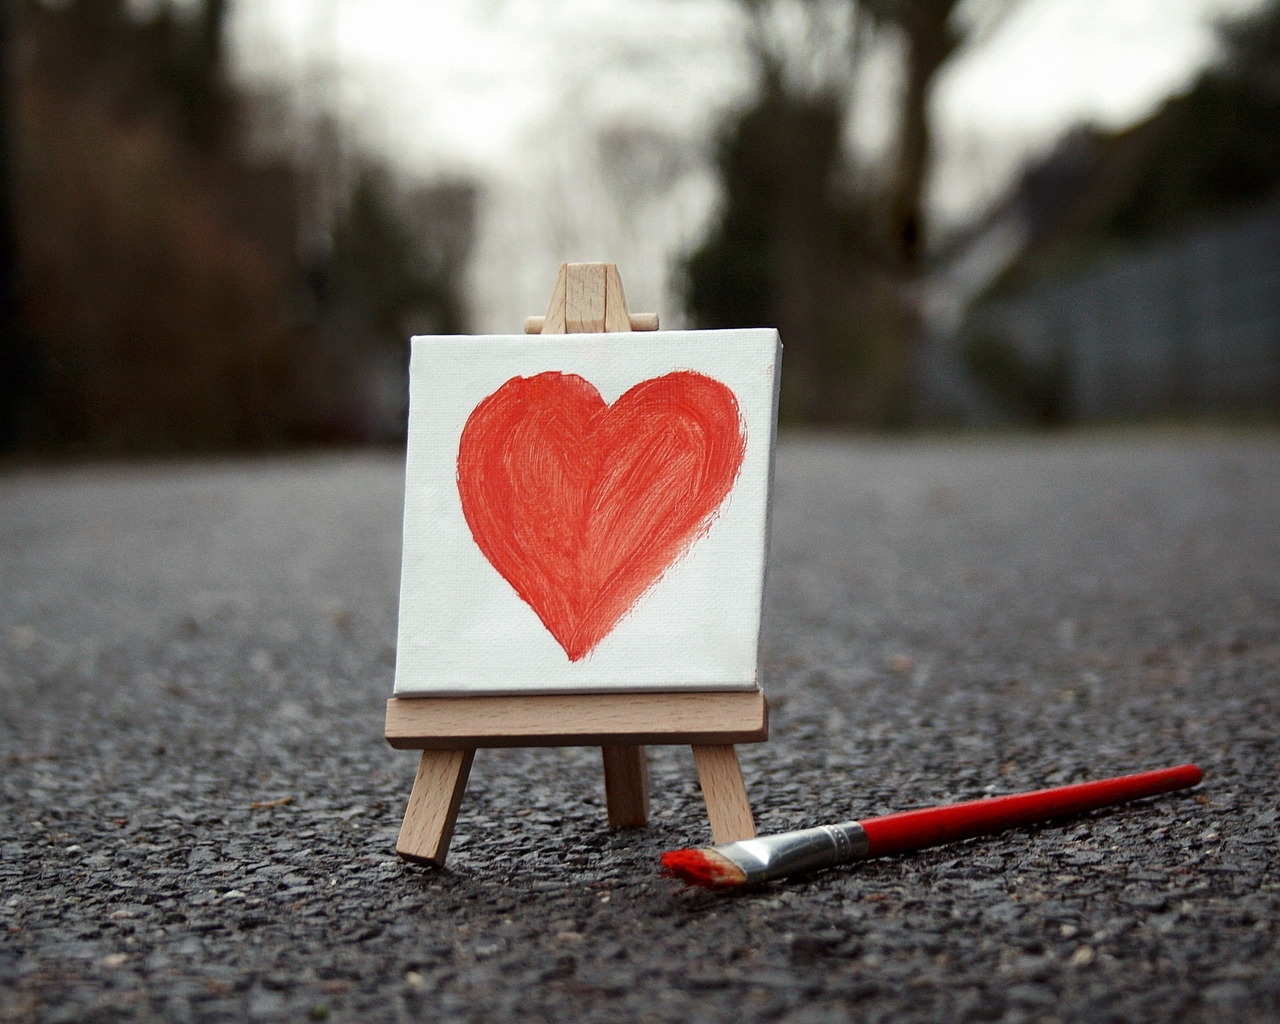 Painted Heart for 1280 x 1024 resolution